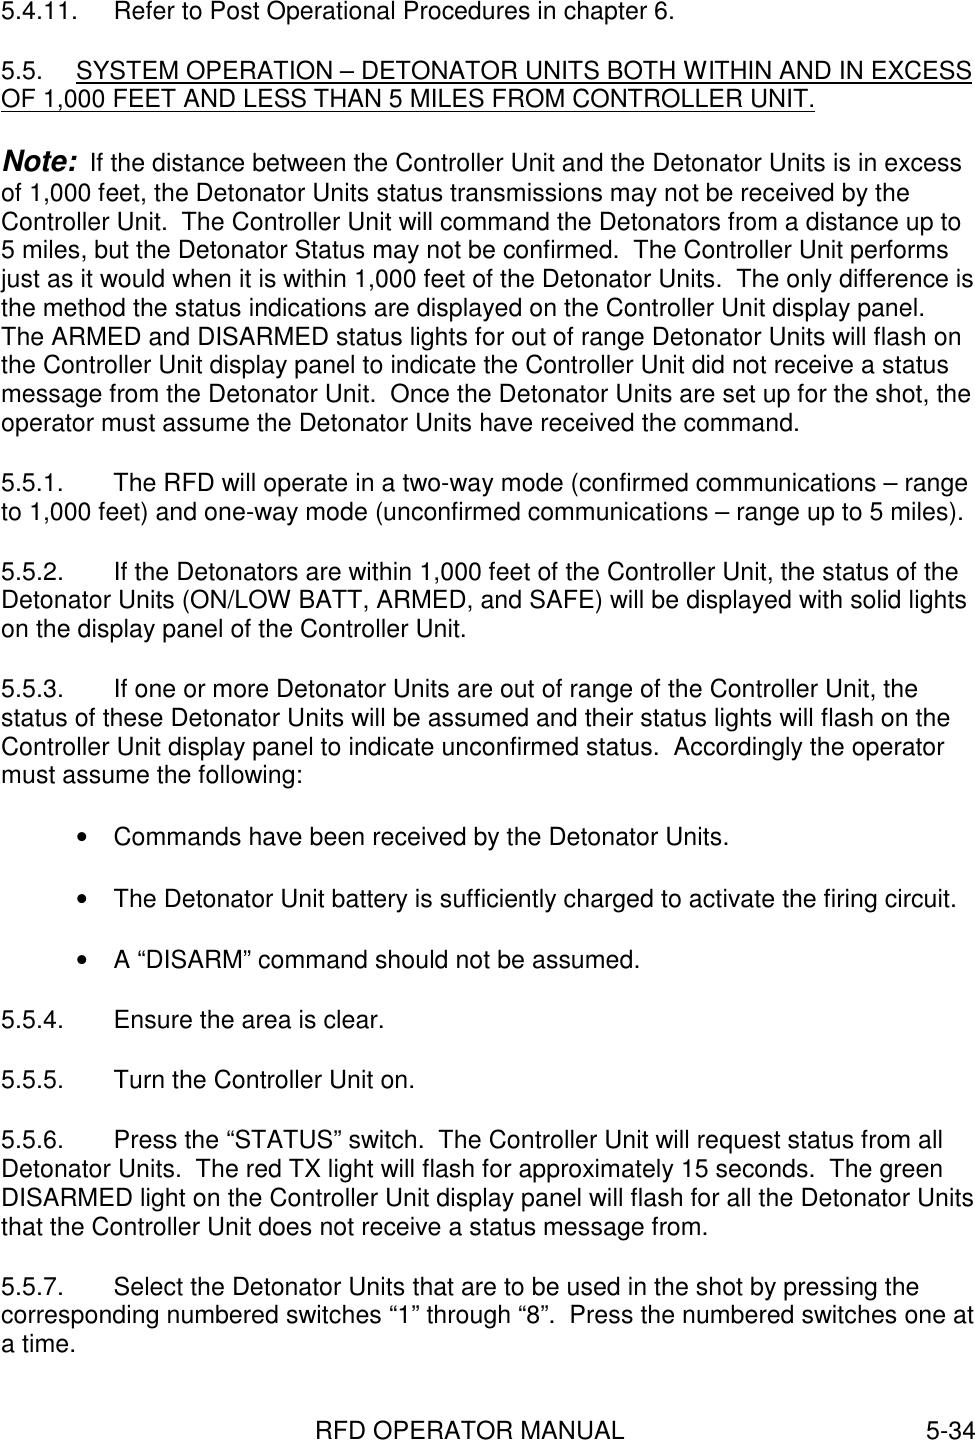 RFD OPERATOR MANUAL 5-345.4.11.  Refer to Post Operational Procedures in chapter 6.5.5.  SYSTEM OPERATION – DETONATOR UNITS BOTH WITHIN AND IN EXCESSOF 1,000 FEET AND LESS THAN 5 MILES FROM CONTROLLER UNIT.Note:  If the distance between the Controller Unit and the Detonator Units is in excessof 1,000 feet, the Detonator Units status transmissions may not be received by theController Unit.  The Controller Unit will command the Detonators from a distance up to5 miles, but the Detonator Status may not be confirmed.  The Controller Unit performsjust as it would when it is within 1,000 feet of the Detonator Units.  The only difference isthe method the status indications are displayed on the Controller Unit display panel.The ARMED and DISARMED status lights for out of range Detonator Units will flash onthe Controller Unit display panel to indicate the Controller Unit did not receive a statusmessage from the Detonator Unit.  Once the Detonator Units are set up for the shot, theoperator must assume the Detonator Units have received the command.5.5.1.  The RFD will operate in a two-way mode (confirmed communications – rangeto 1,000 feet) and one-way mode (unconfirmed communications – range up to 5 miles).5.5.2.  If the Detonators are within 1,000 feet of the Controller Unit, the status of theDetonator Units (ON/LOW BATT, ARMED, and SAFE) will be displayed with solid lightson the display panel of the Controller Unit.5.5.3.  If one or more Detonator Units are out of range of the Controller Unit, thestatus of these Detonator Units will be assumed and their status lights will flash on theController Unit display panel to indicate unconfirmed status.  Accordingly the operatormust assume the following:•  Commands have been received by the Detonator Units.•  The Detonator Unit battery is sufficiently charged to activate the firing circuit.•  A “DISARM” command should not be assumed.5.5.4.  Ensure the area is clear.5.5.5.  Turn the Controller Unit on.5.5.6.  Press the “STATUS” switch.  The Controller Unit will request status from allDetonator Units.  The red TX light will flash for approximately 15 seconds.  The greenDISARMED light on the Controller Unit display panel will flash for all the Detonator Unitsthat the Controller Unit does not receive a status message from.5.5.7.  Select the Detonator Units that are to be used in the shot by pressing thecorresponding numbered switches “1” through “8”.  Press the numbered switches one ata time.